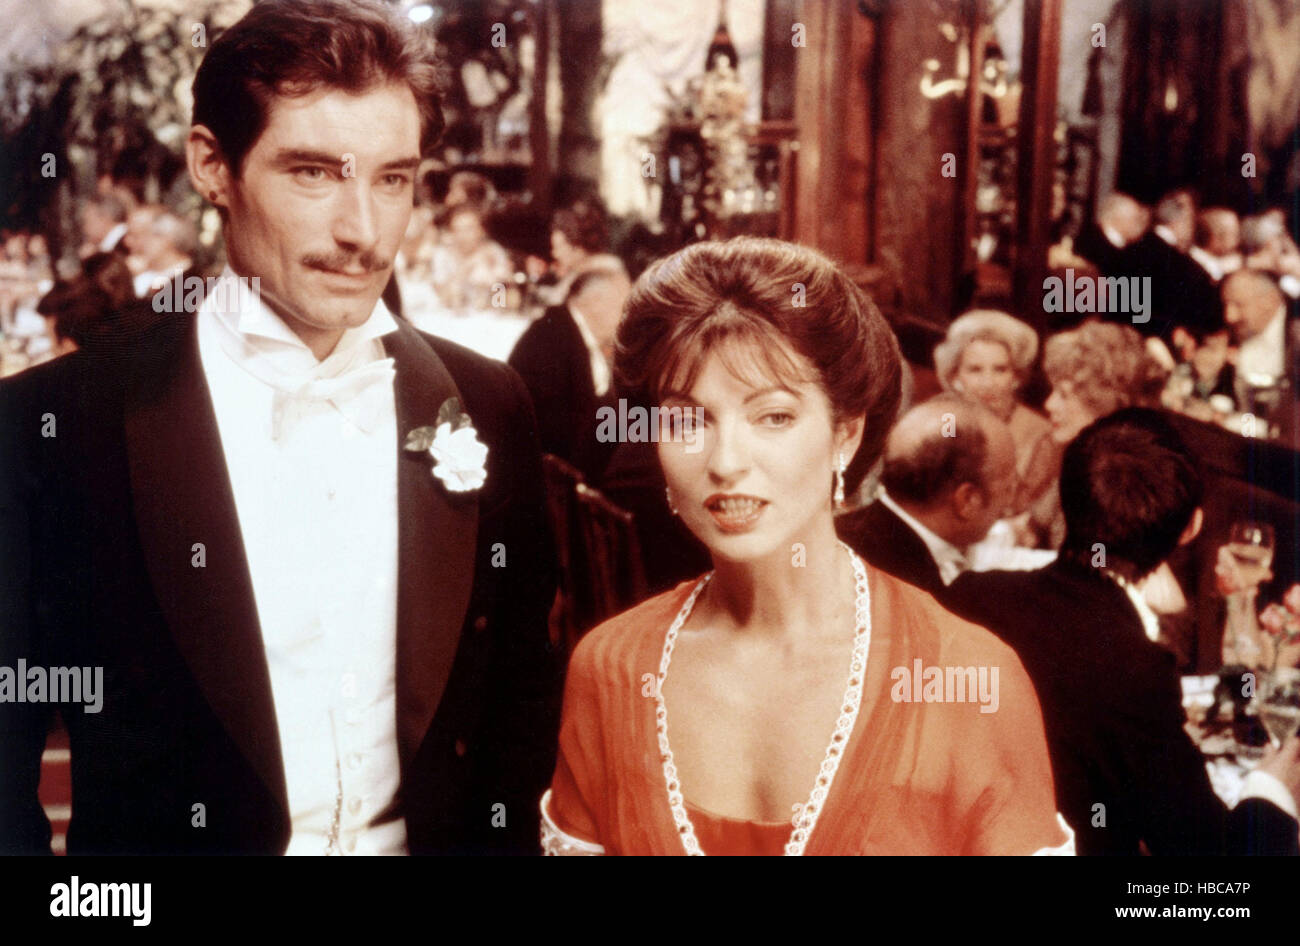 CHANEL SOLITAIRE, Timothy Dalton, Marie-France Pisier, 1981, (c) United  Film Distribution/courtesy Everett Collection Stock Photo - Alamy